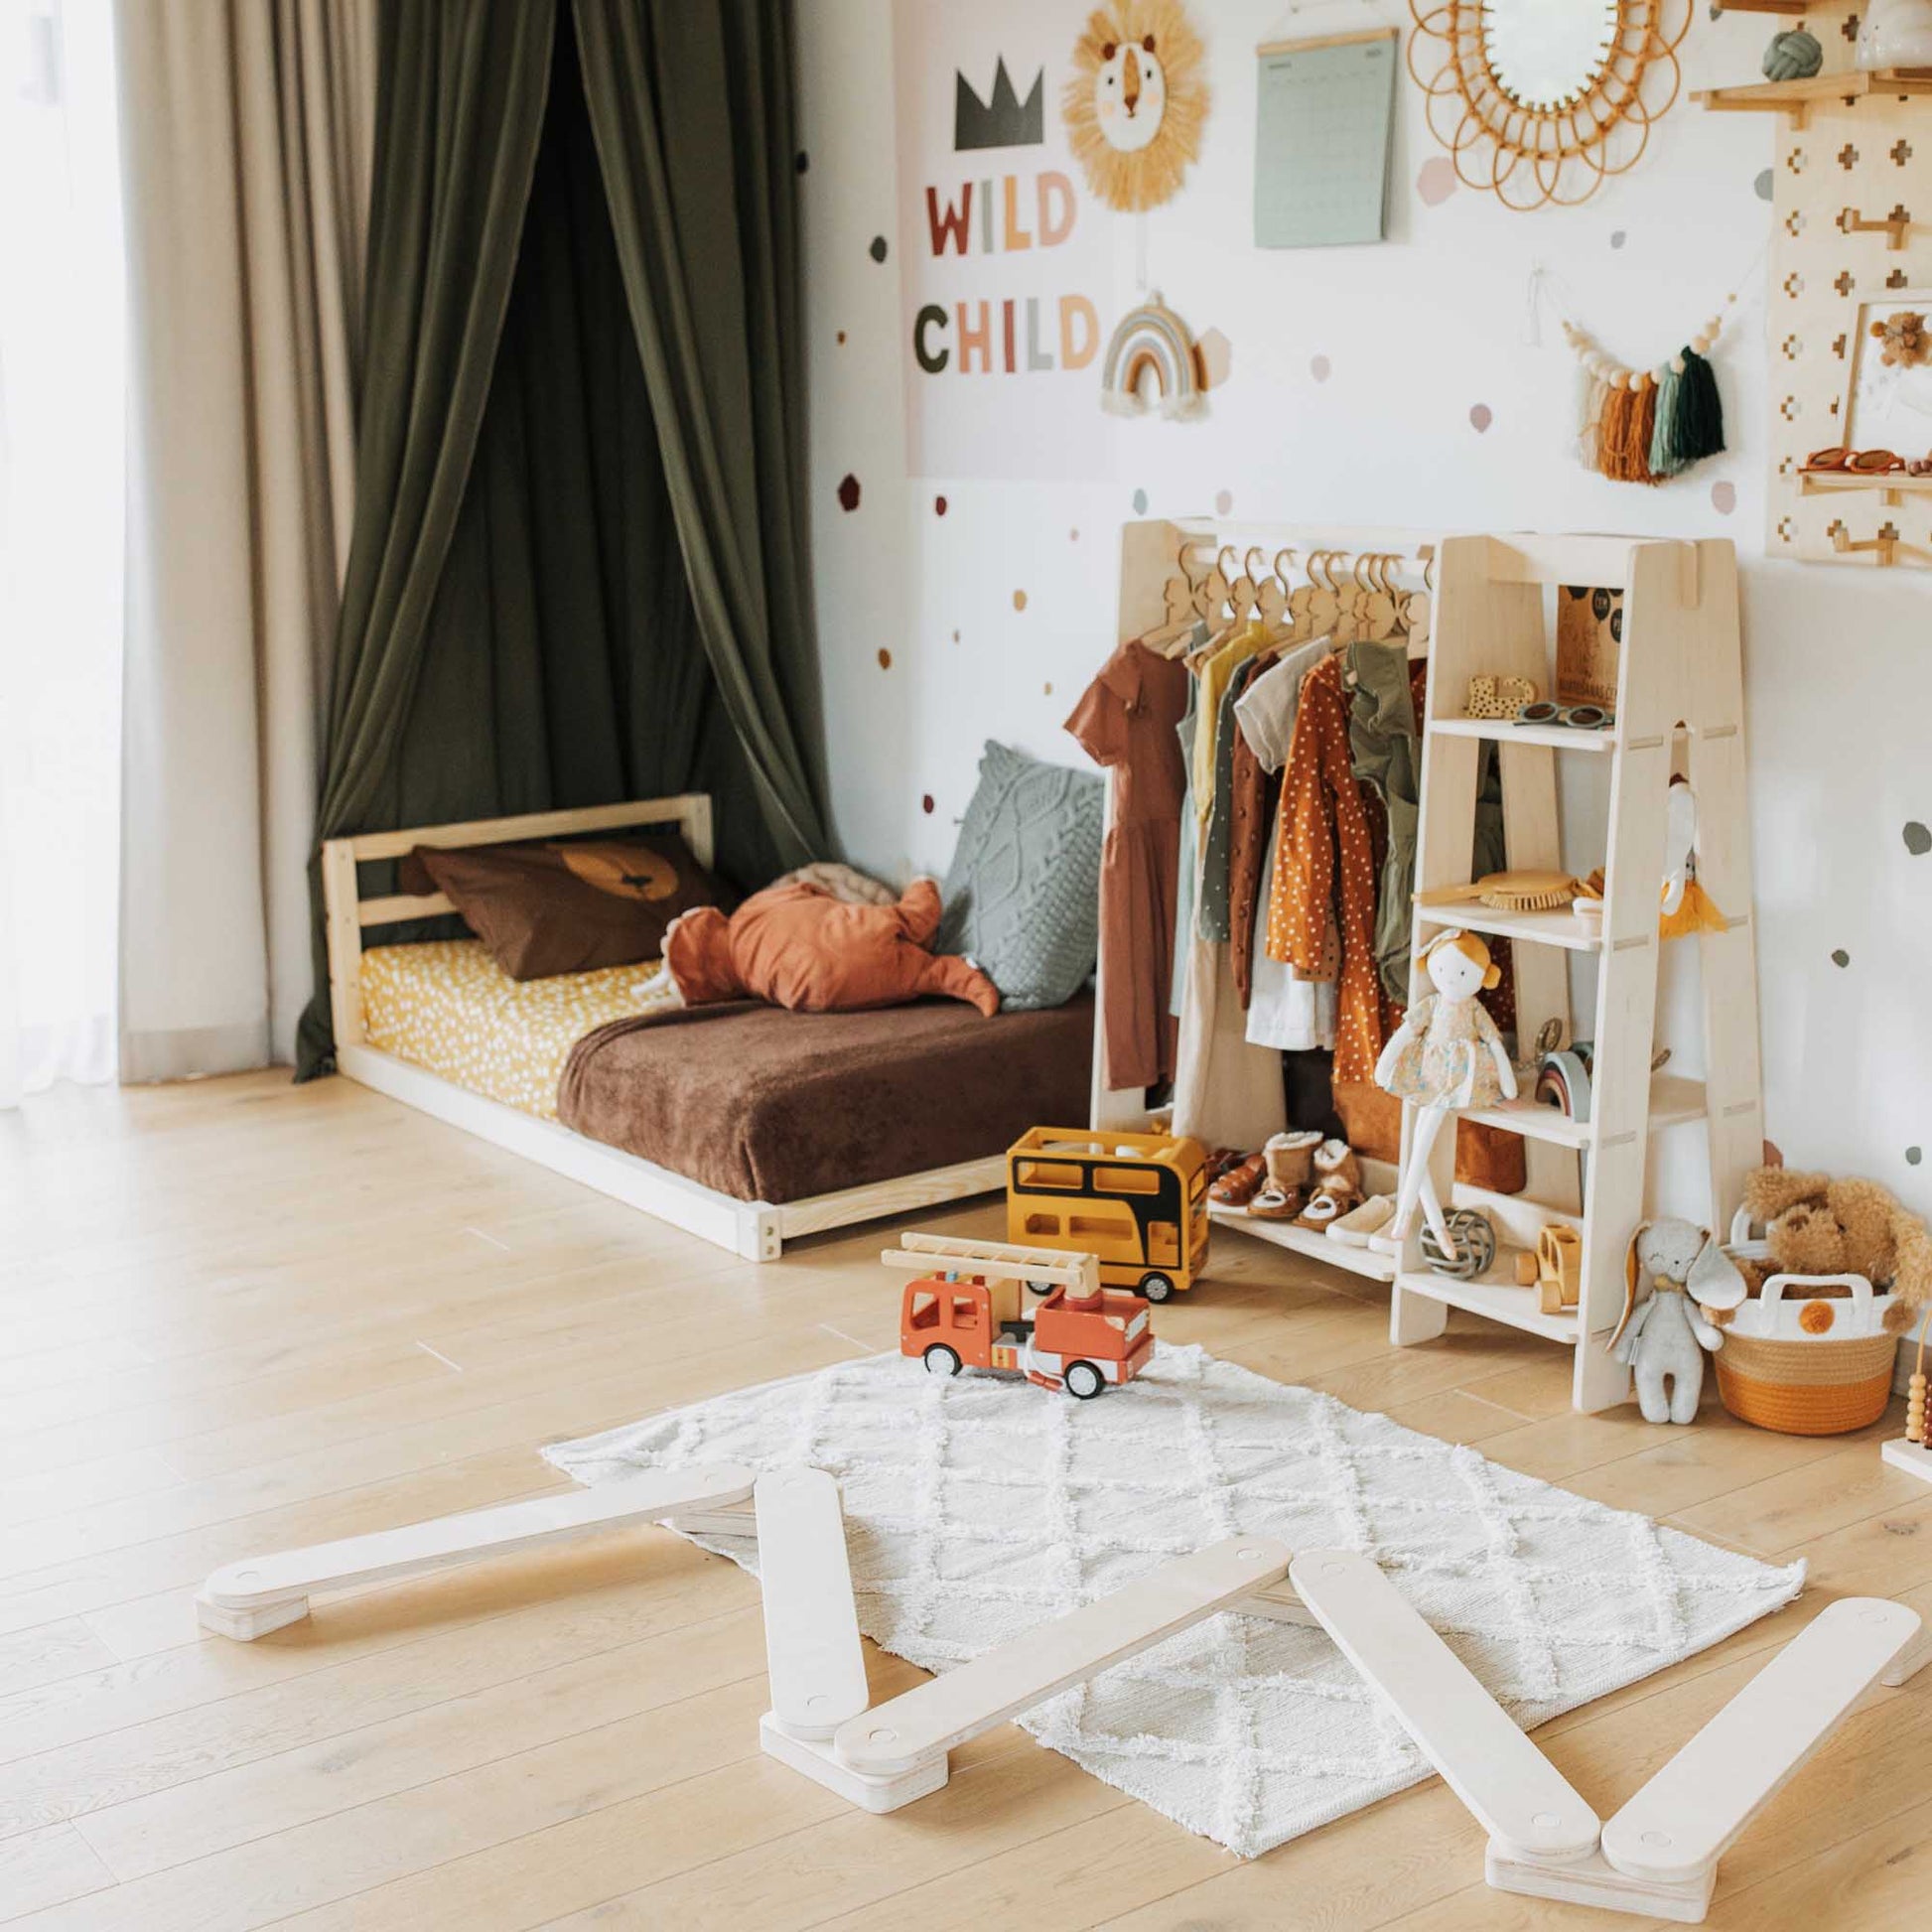 A child's room with toys, a 2-in-1 transformable kids' bed with a horizontal rail headboard, and a montessori bed from Sweet Home From Wood.